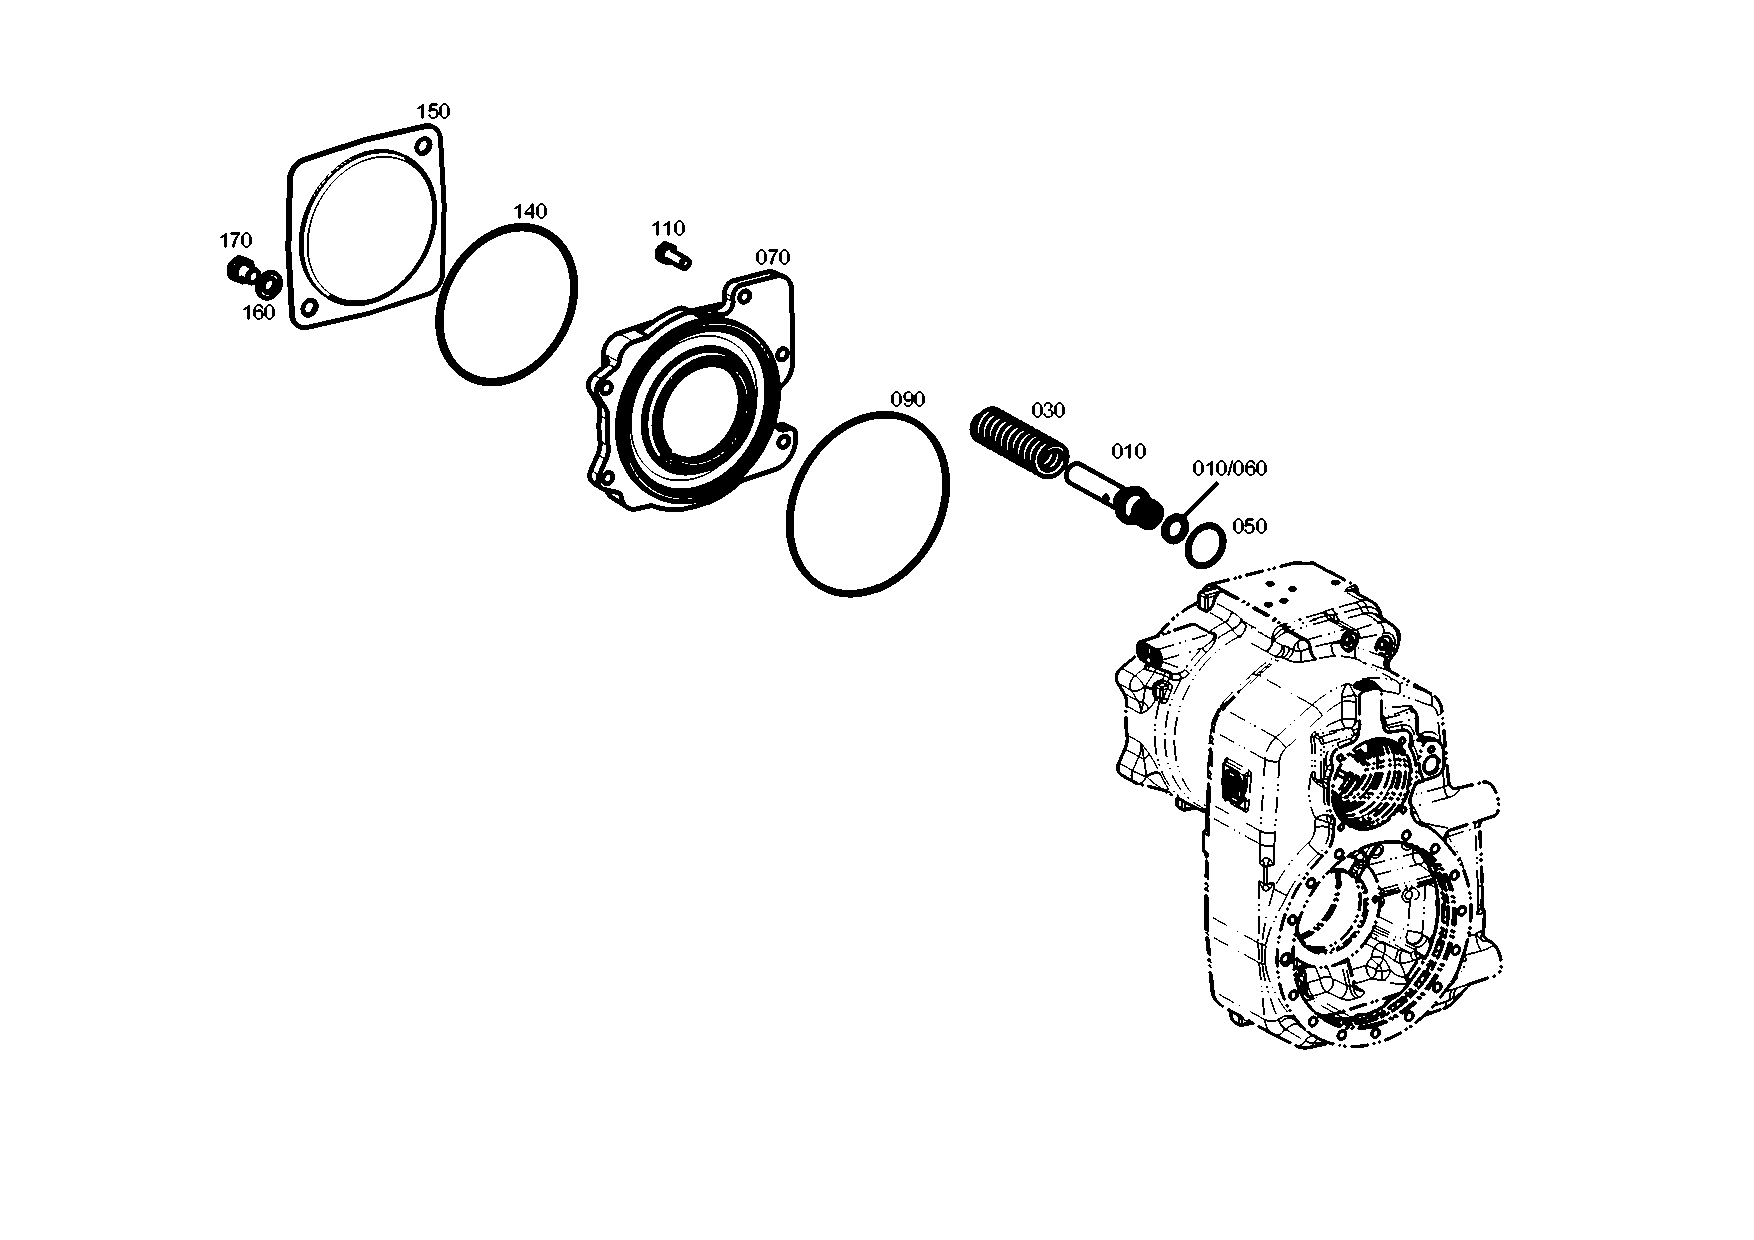 drawing for E. N. M. T. P. / CPG 4143 201 021 - PISTON (figure 1)